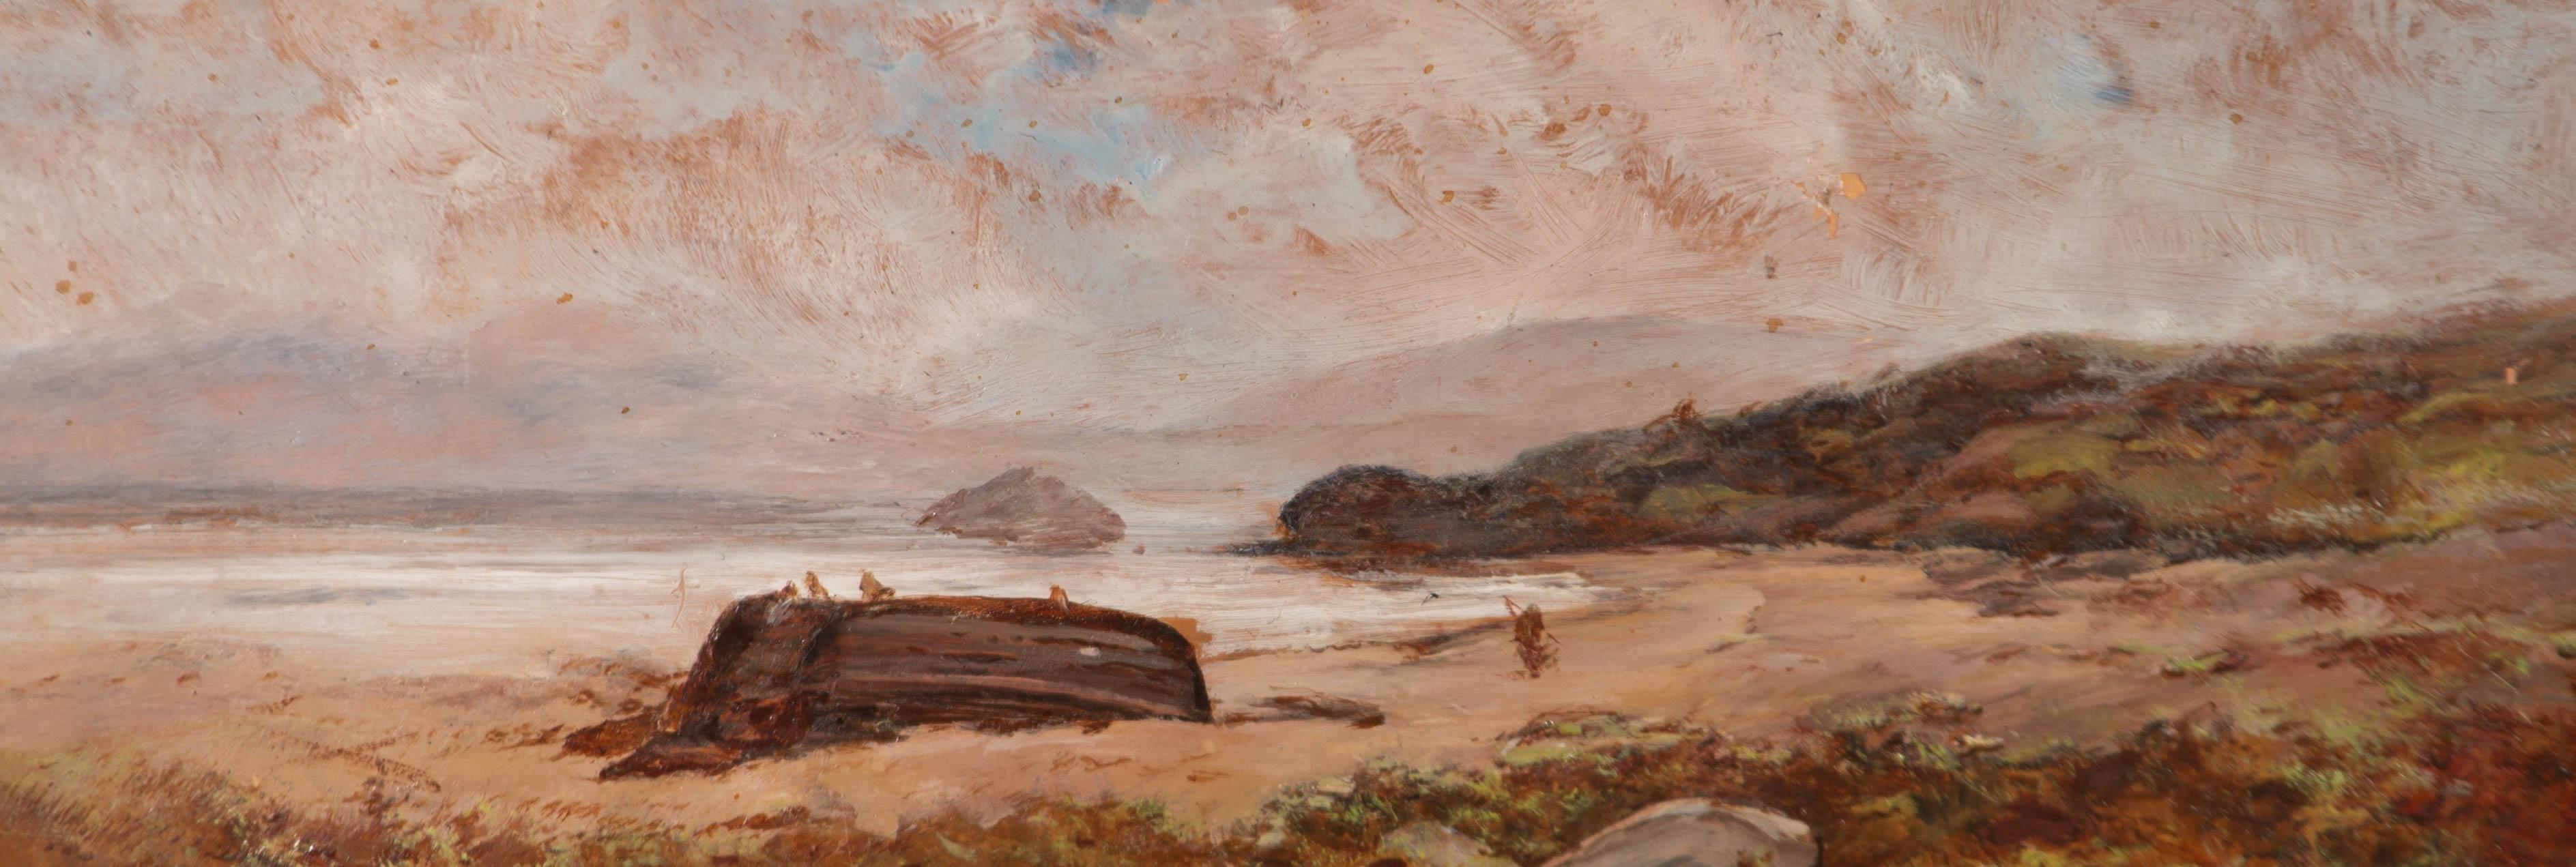 Framed Early 20th Century Oil - Windy Beach Scene - Painting by Unknown